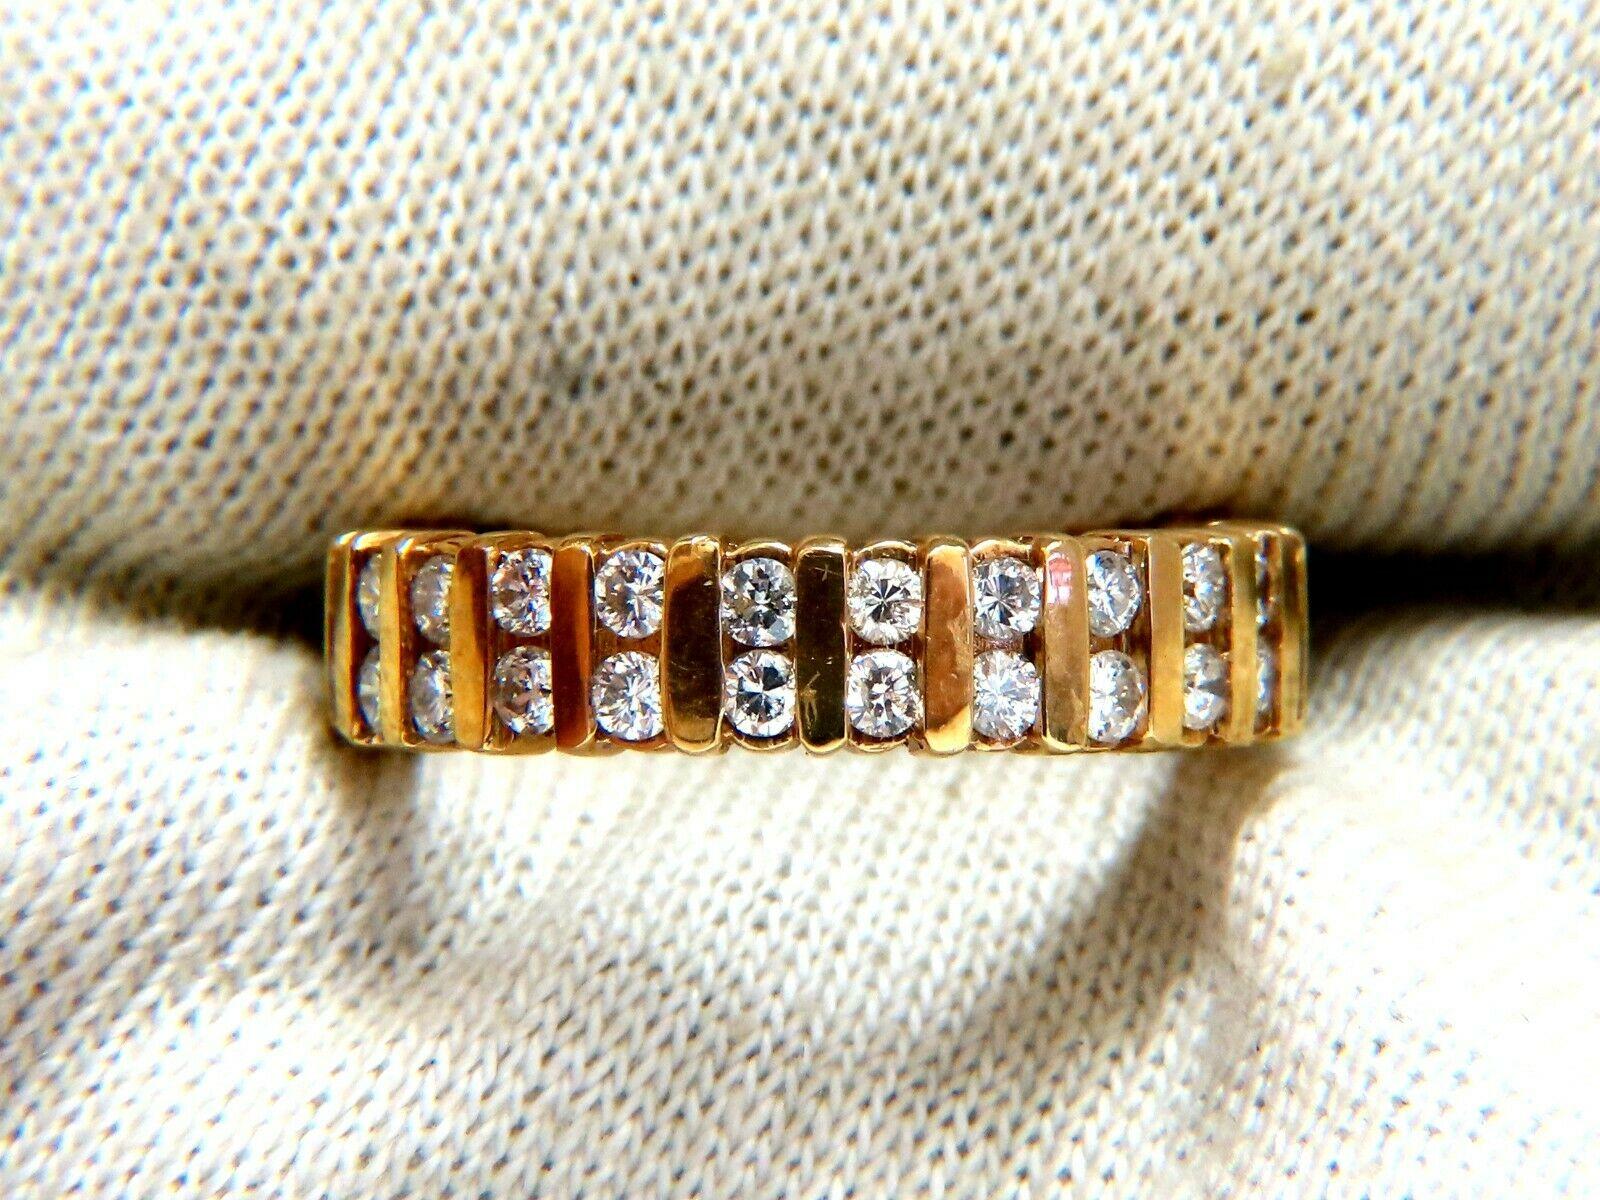 Channel Set Flat Eternity Band.

1.50ct. Natural round cut brilliant diamond

Durable Built.

Vs-2 clarity  H color.

14kt yellow gold.

6.1 Grams

Overall ring: 5mm diameter

Depth: 2.7mm

Current ring size: 7.75

May professionally resize, please